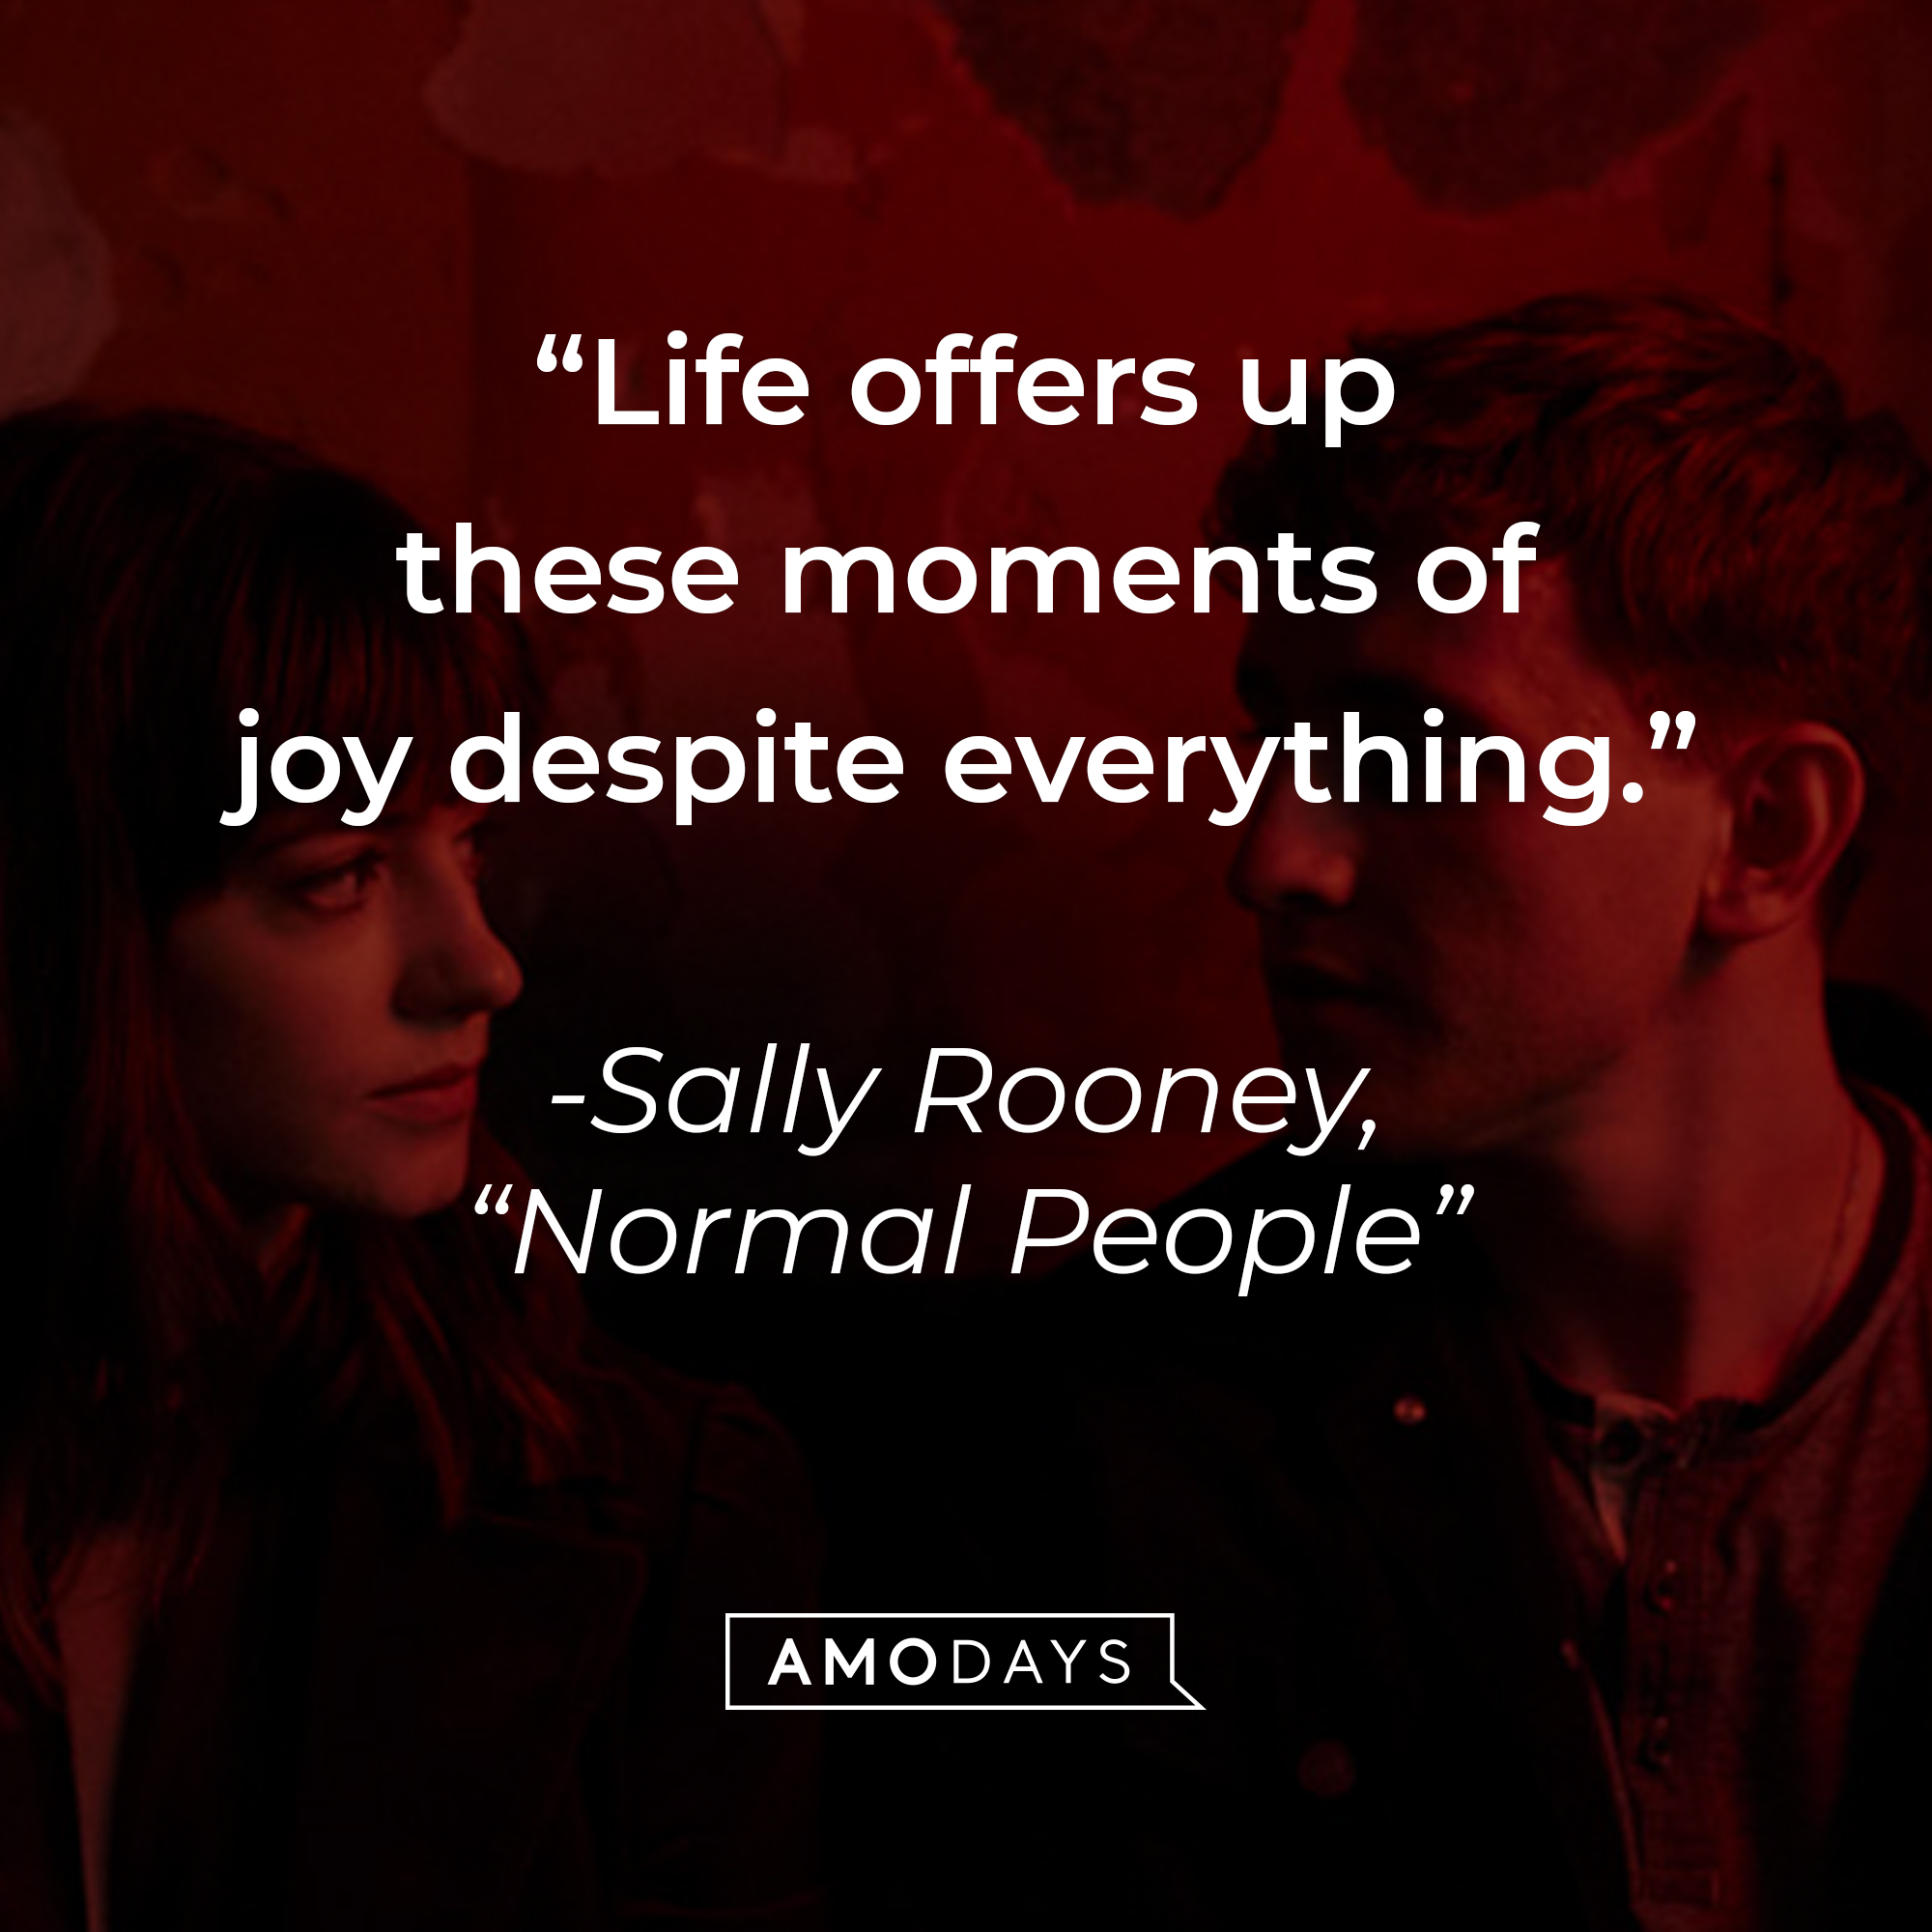 Marianne and Connell,  with Sally Rooney’s quote from her novel, “Normal People”: “Life offers up these moments of joy despite everything.” | Source: AmoDays